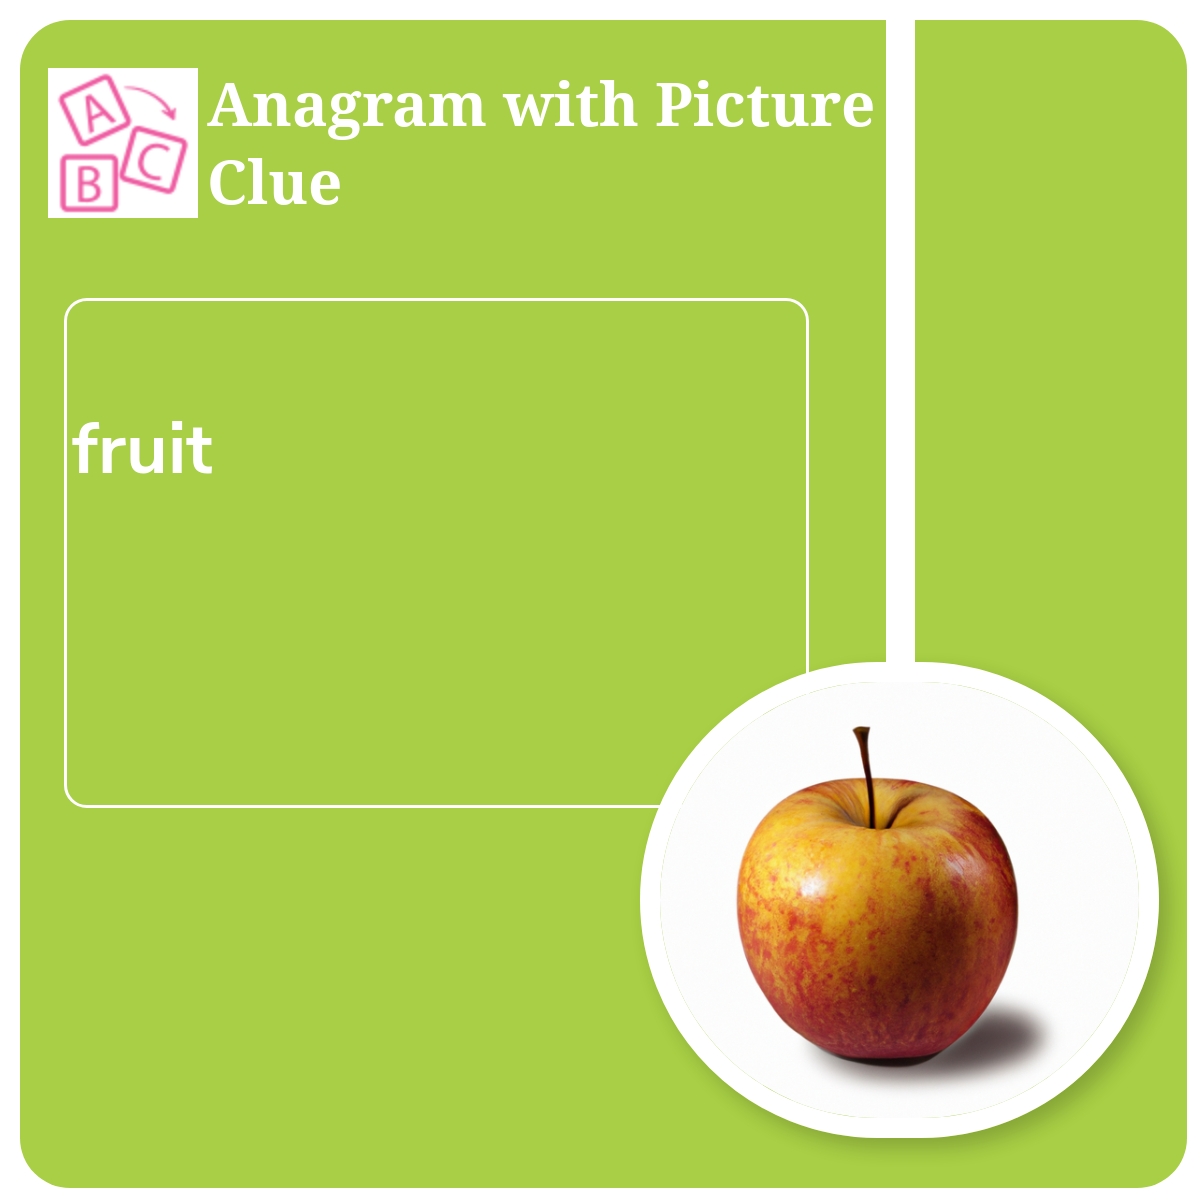 Anagram With Picture Clue: Fruit